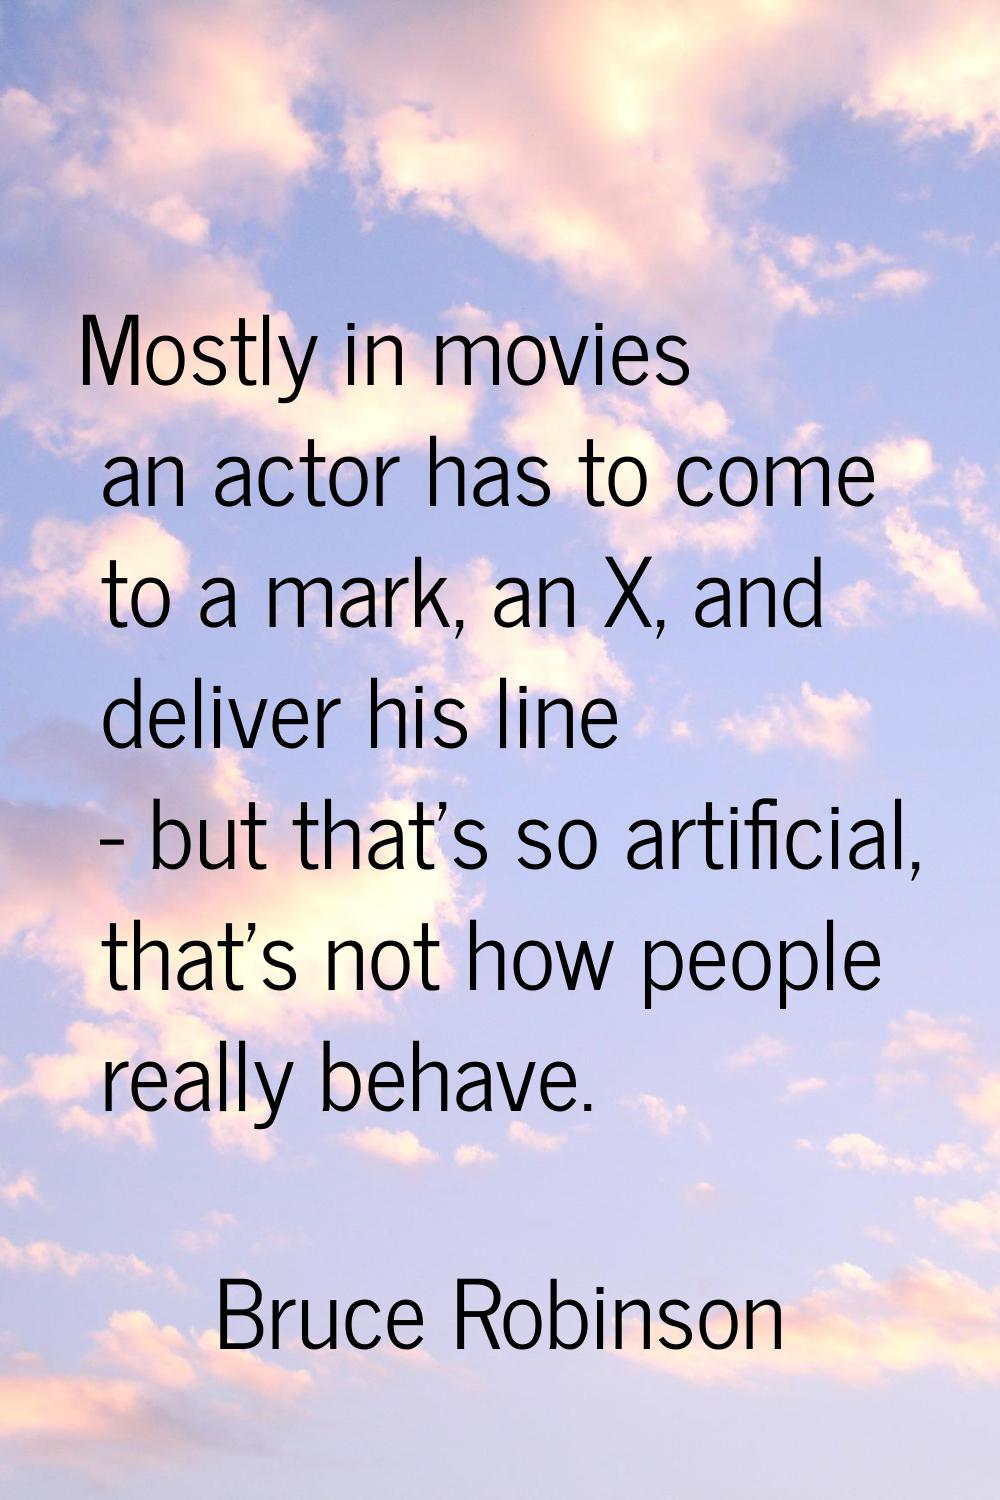 Mostly in movies an actor has to come to a mark, an X, and deliver his line - but that's so artific